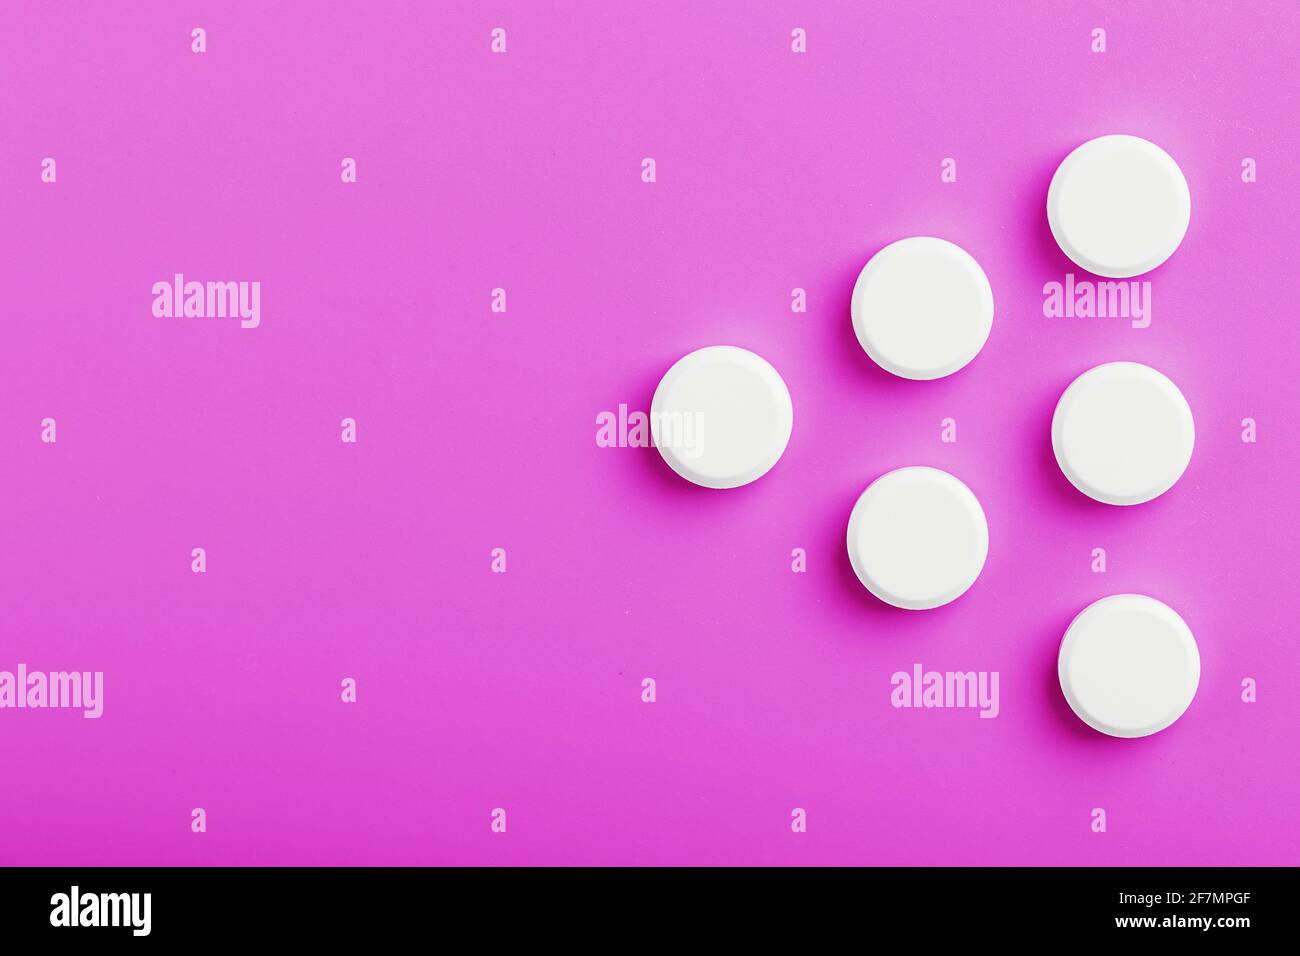 White Ecstasy pills in a row on a pink background, isolate. Top view, place for text. Stock Photo